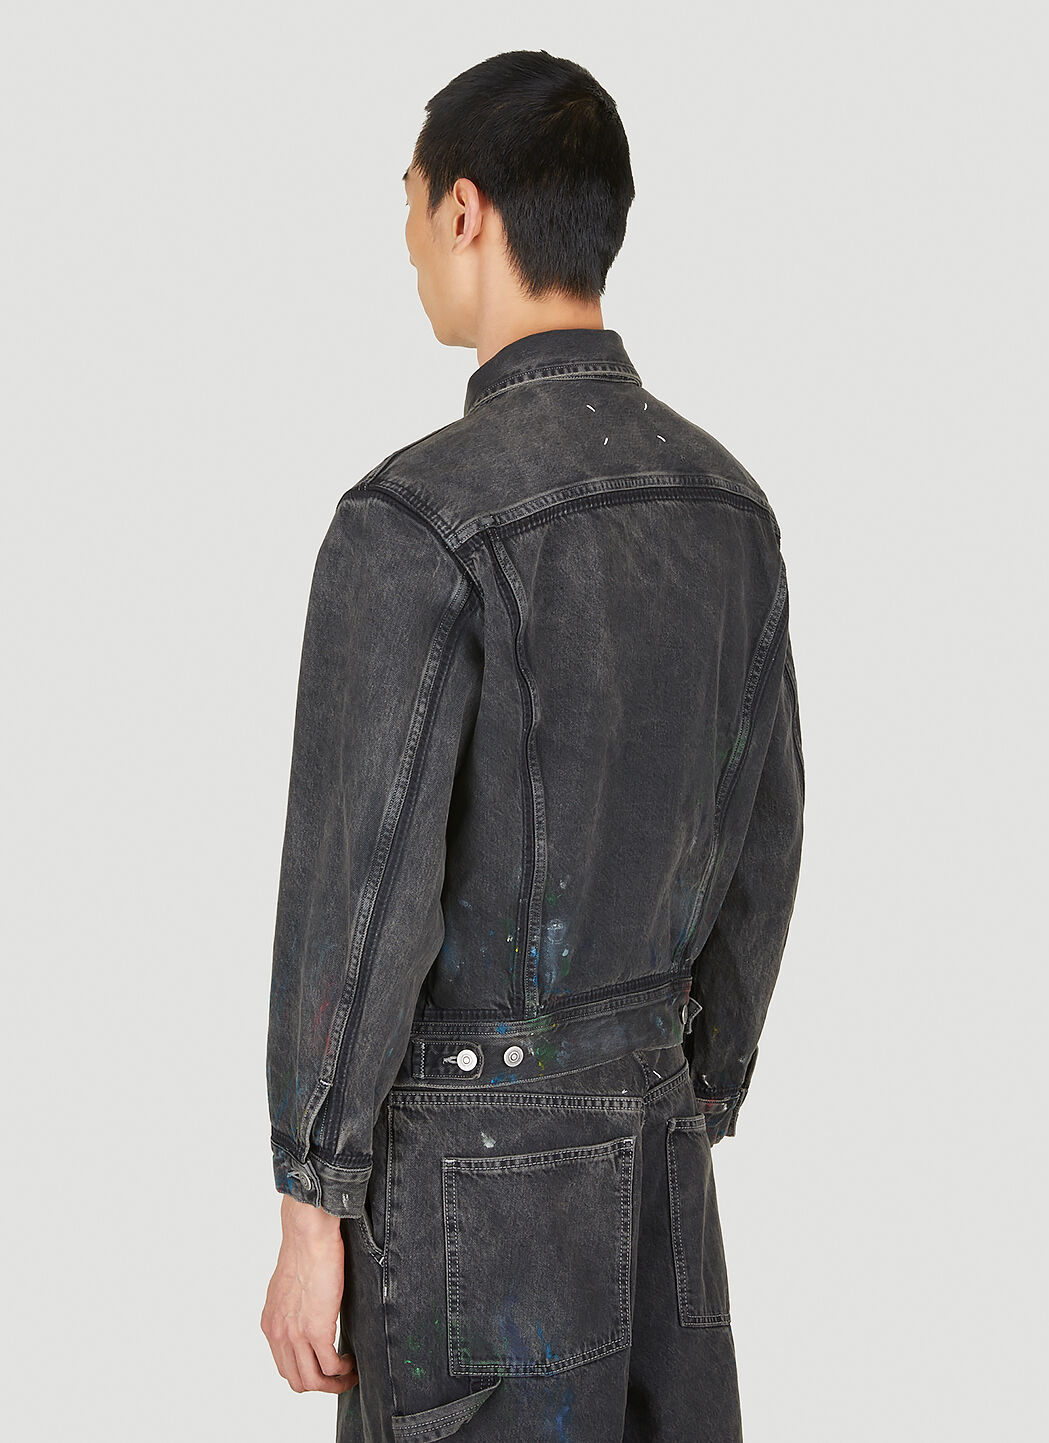 Hi Street Designer Ripped Markham Denim Jackets With Distressed Denim And  Holes Streetwear Trucker Outerwear Tops From Just4urwear, $51.16 |  DHgate.Com